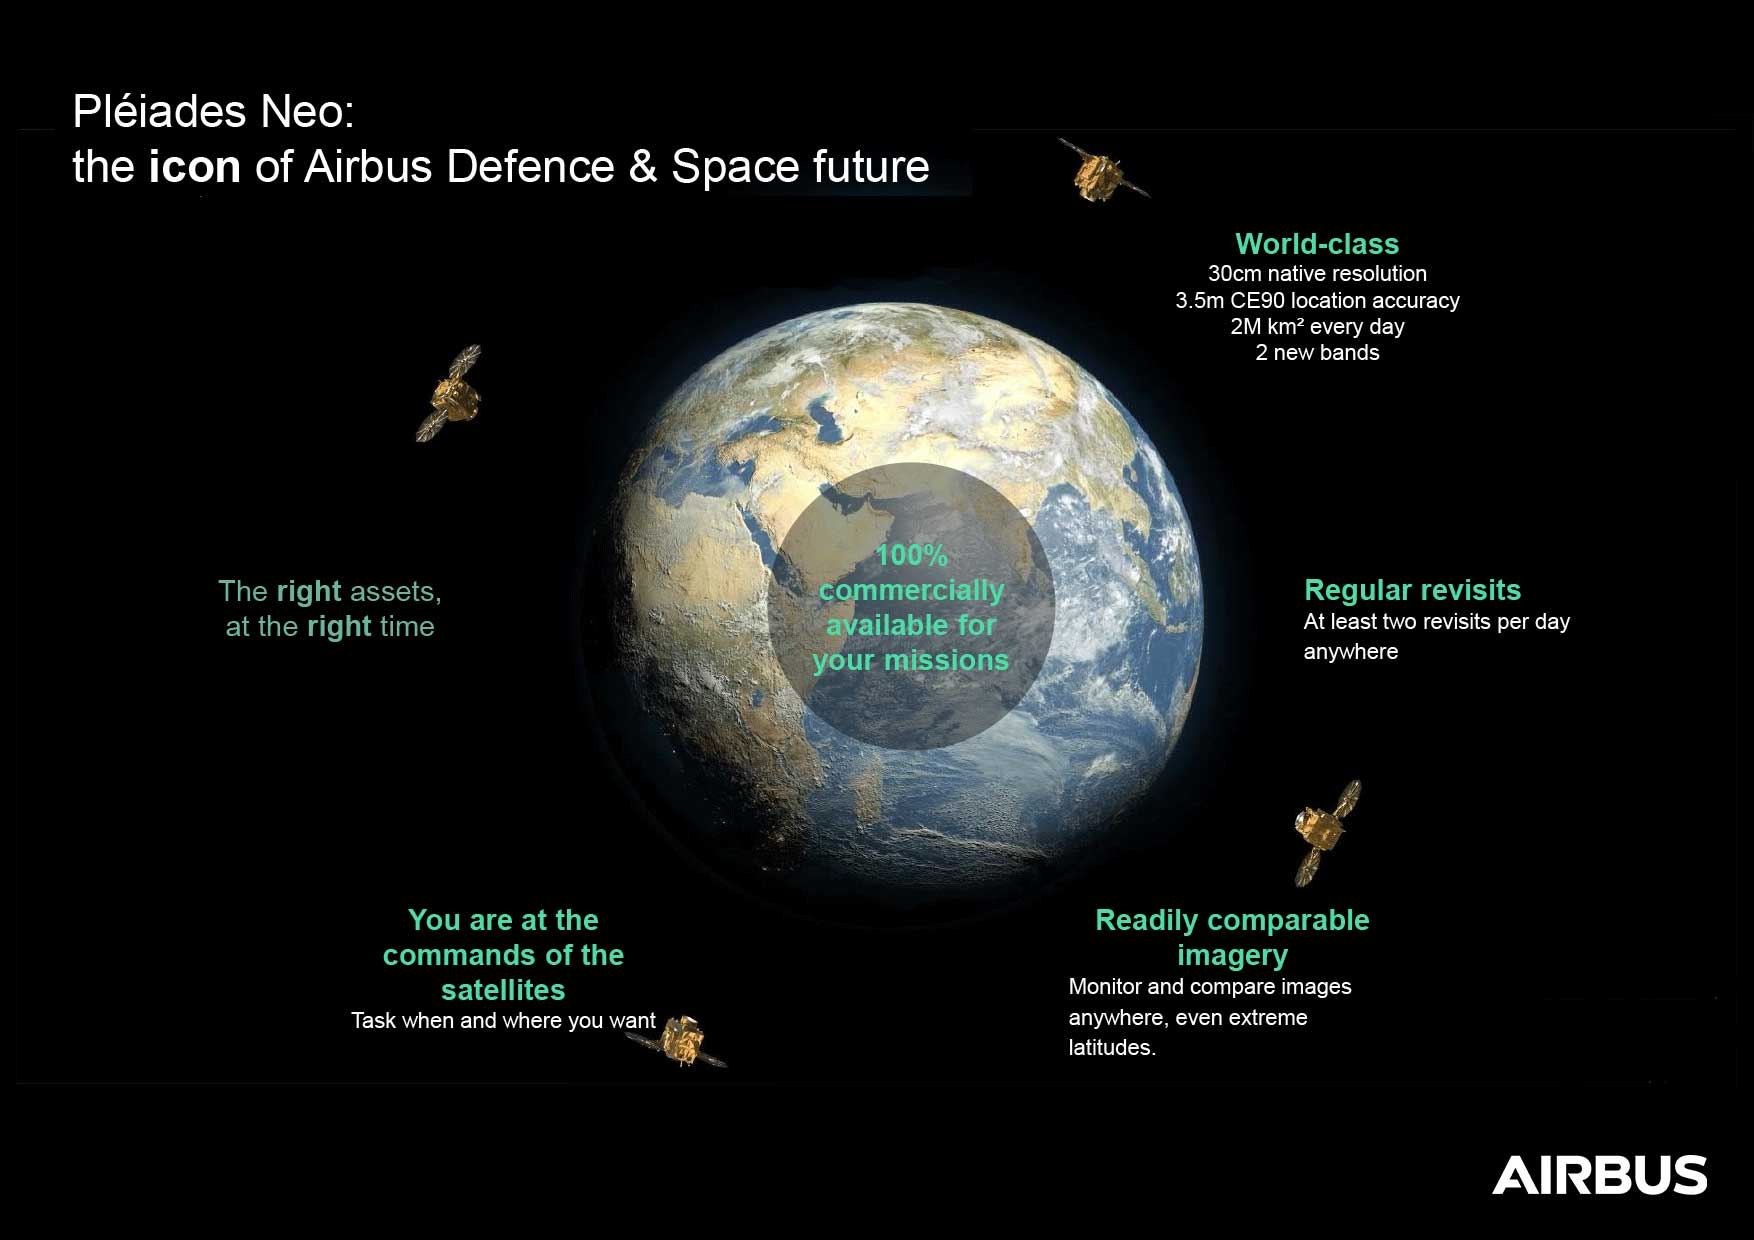 Pléiades Neo: the icone of Airbus Defence and Space future